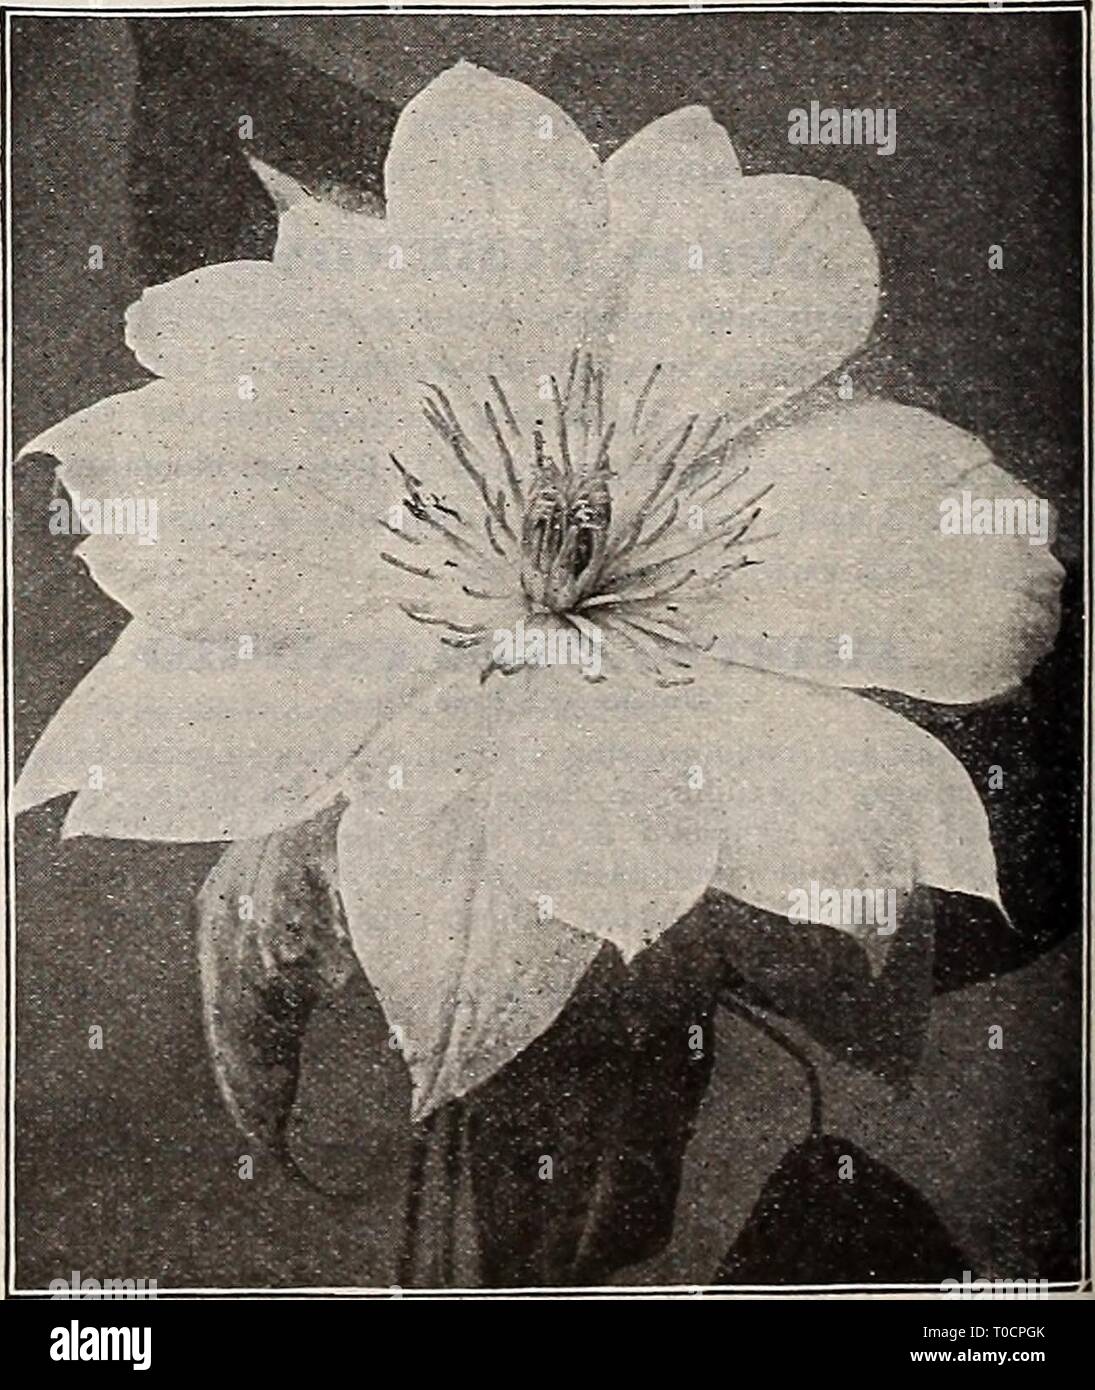 Dreer's garden book 1918 (1918) Dreer's garden book 1918 dreersgardenbook1918henr Year: 1918  VARIOUS HARDY CLEMATIS Coccinea. Handsome bell-shaped flowers of a bright coral-red color from June until frost. 25 cts. each; $2.50 per doz. Crispa. Bears an abundance of pretty bell-shaped, fragrant, lavender flowers, with white centre, from June until frost. 25 cts. each; $2.50 per doz. Hontana Qrandiflora. Of stronger growth than any other Clematis, and succeeds under the most adverse conditions, and is perfectly hardy. Its flowers, which resemble the Anemone or Windflower, are snow-whitej ]£ to 2 Stock Photo